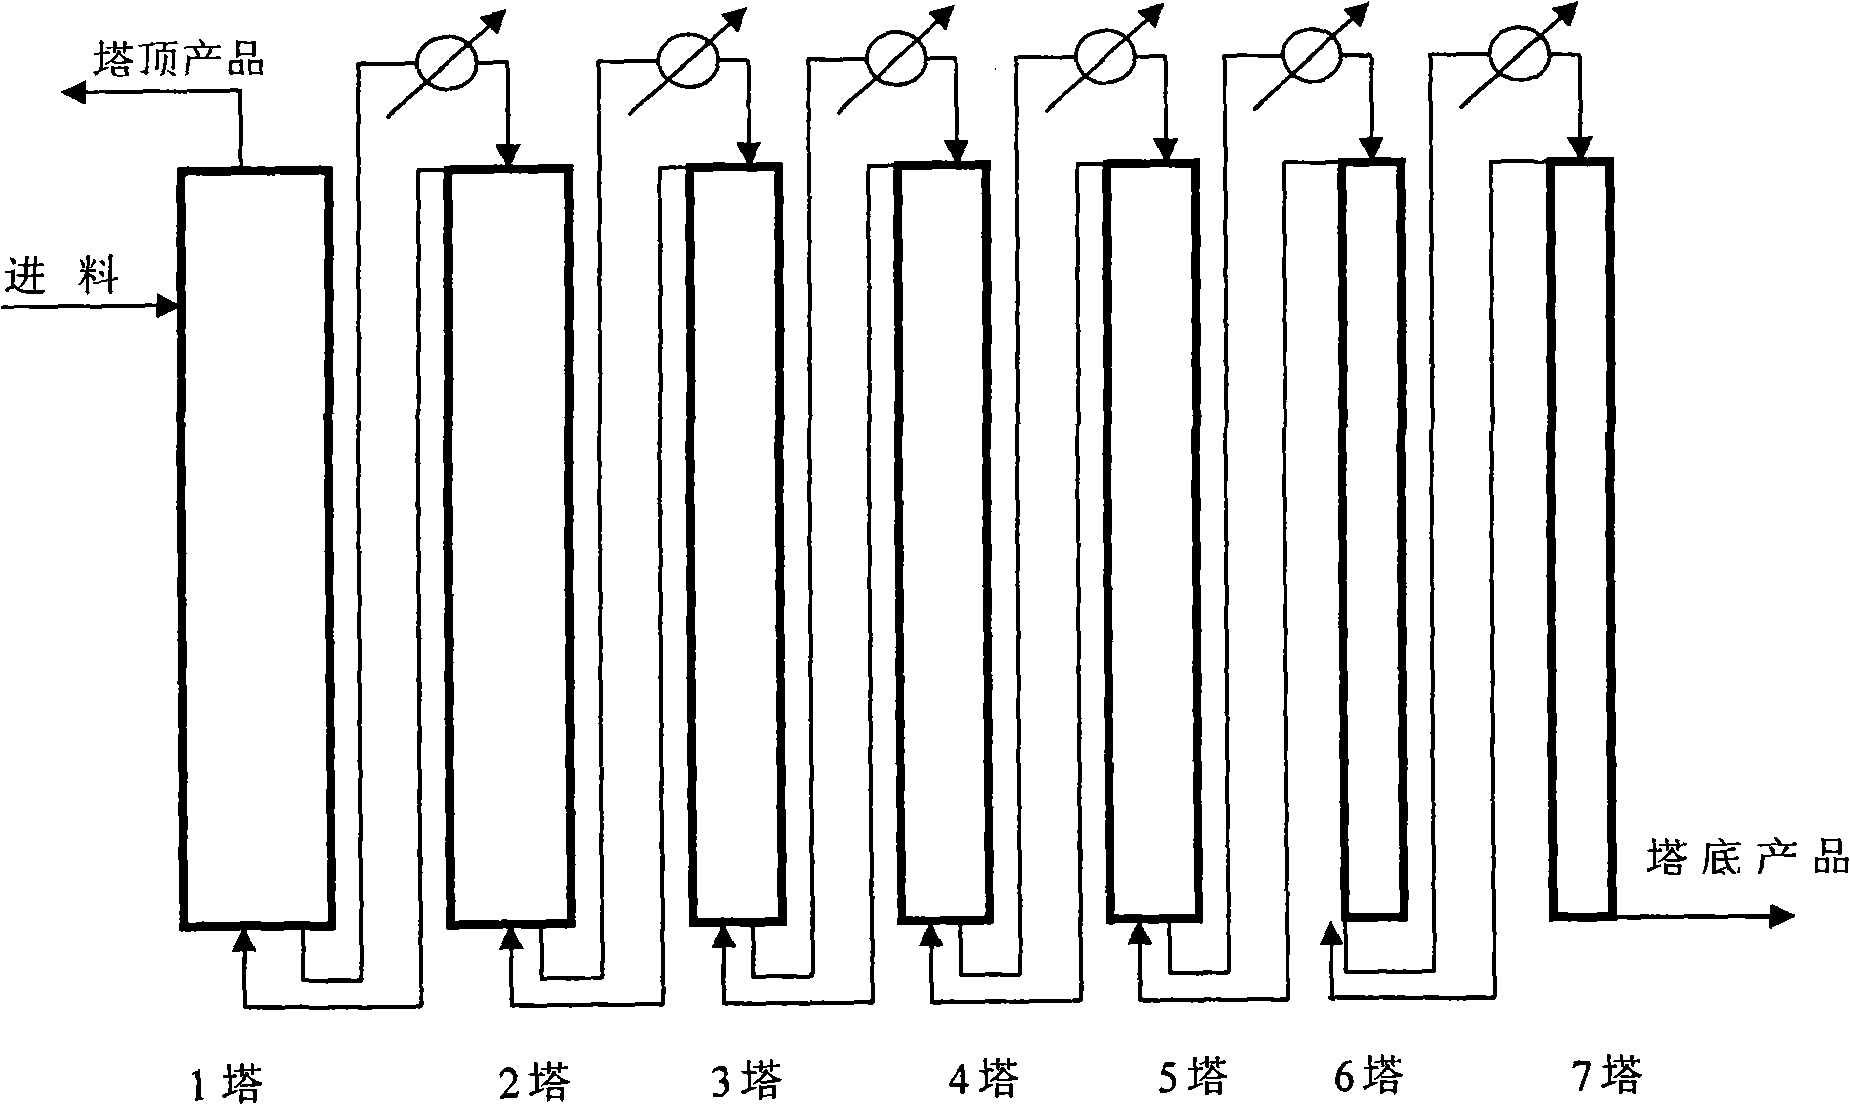 Method for producing O18 water and deuterium deficient water